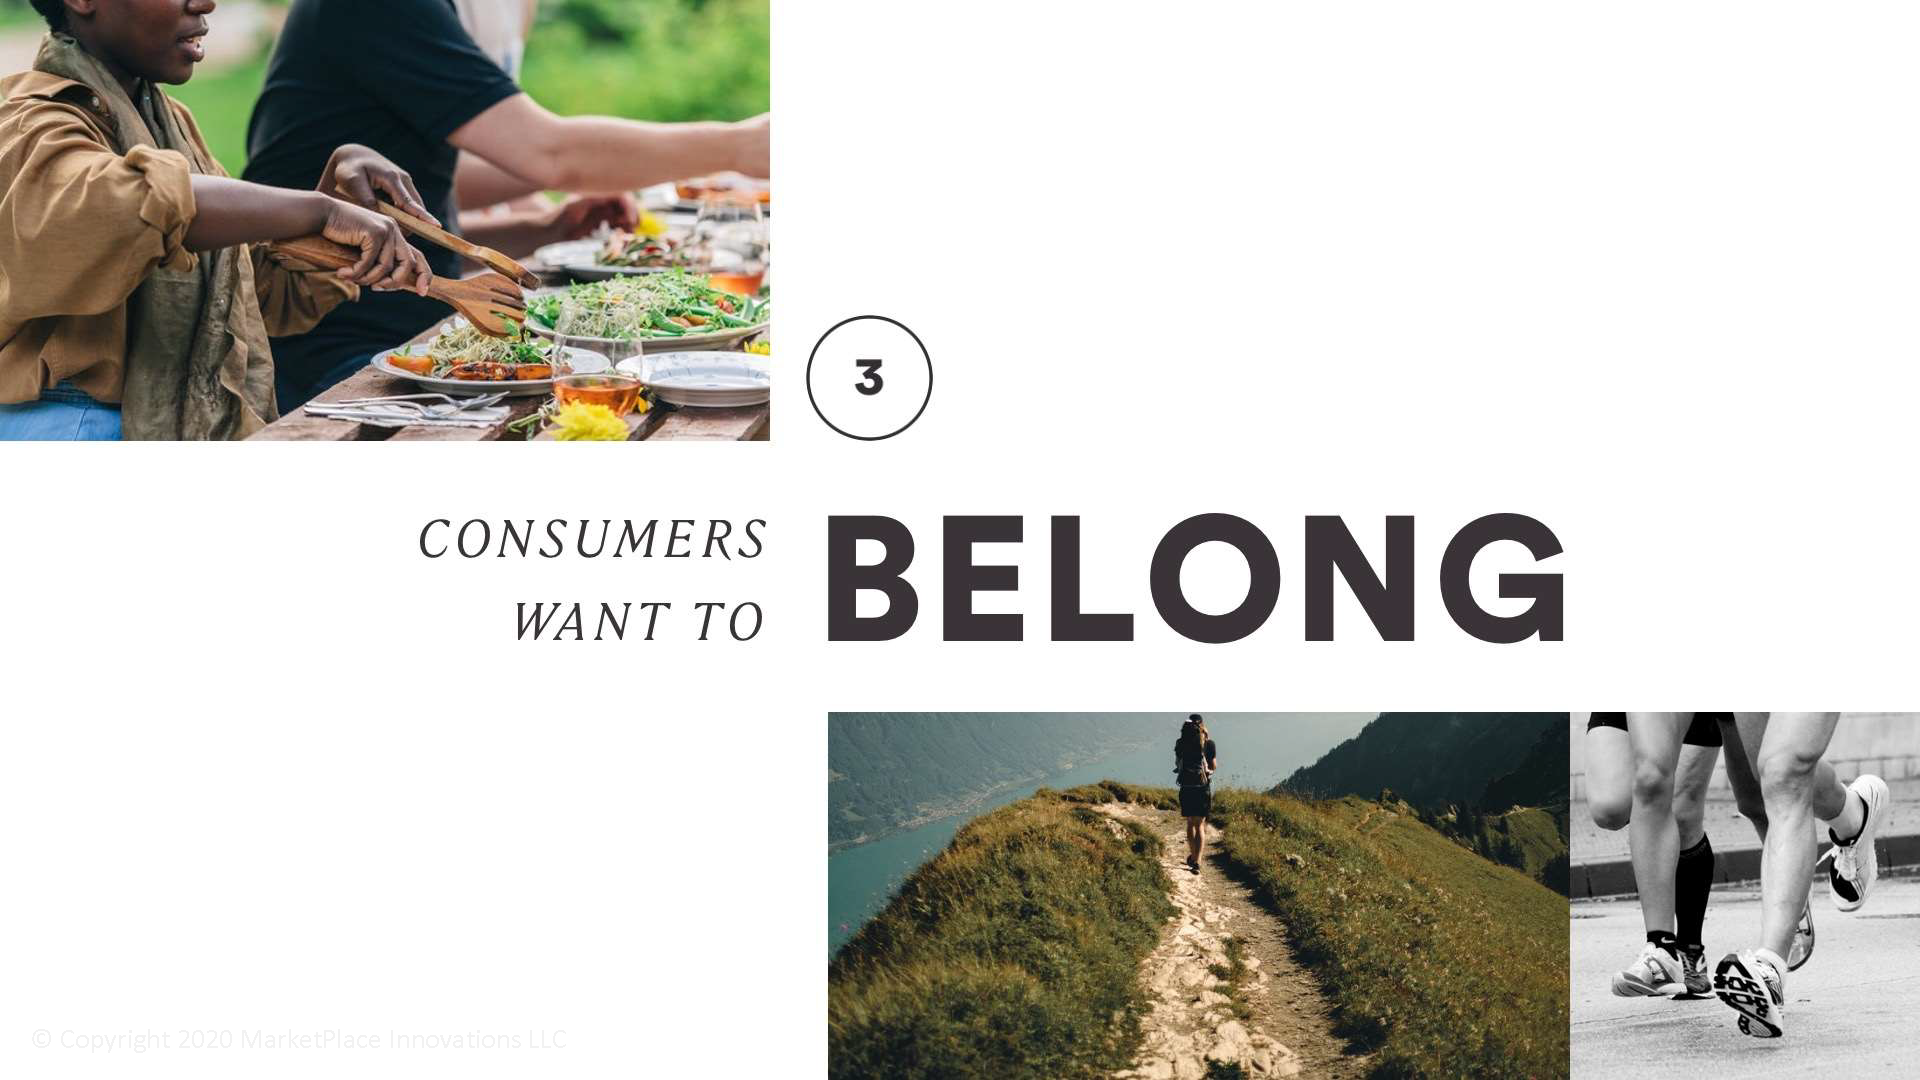 consumers want to belong - health and wellness after covid